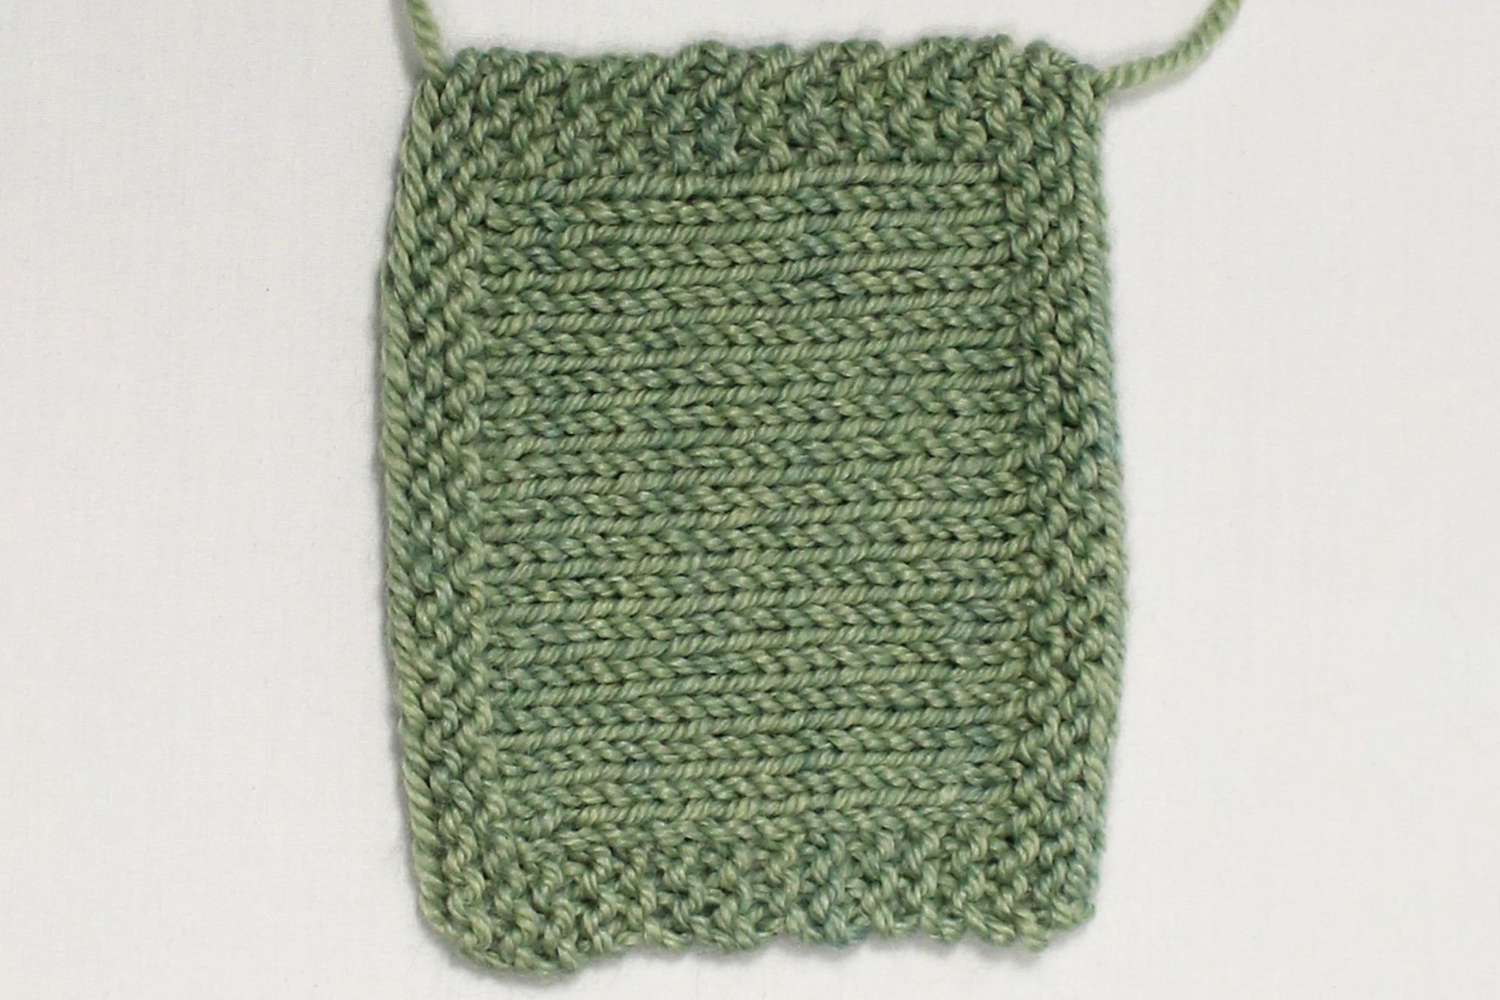 Correct Knit Swatch